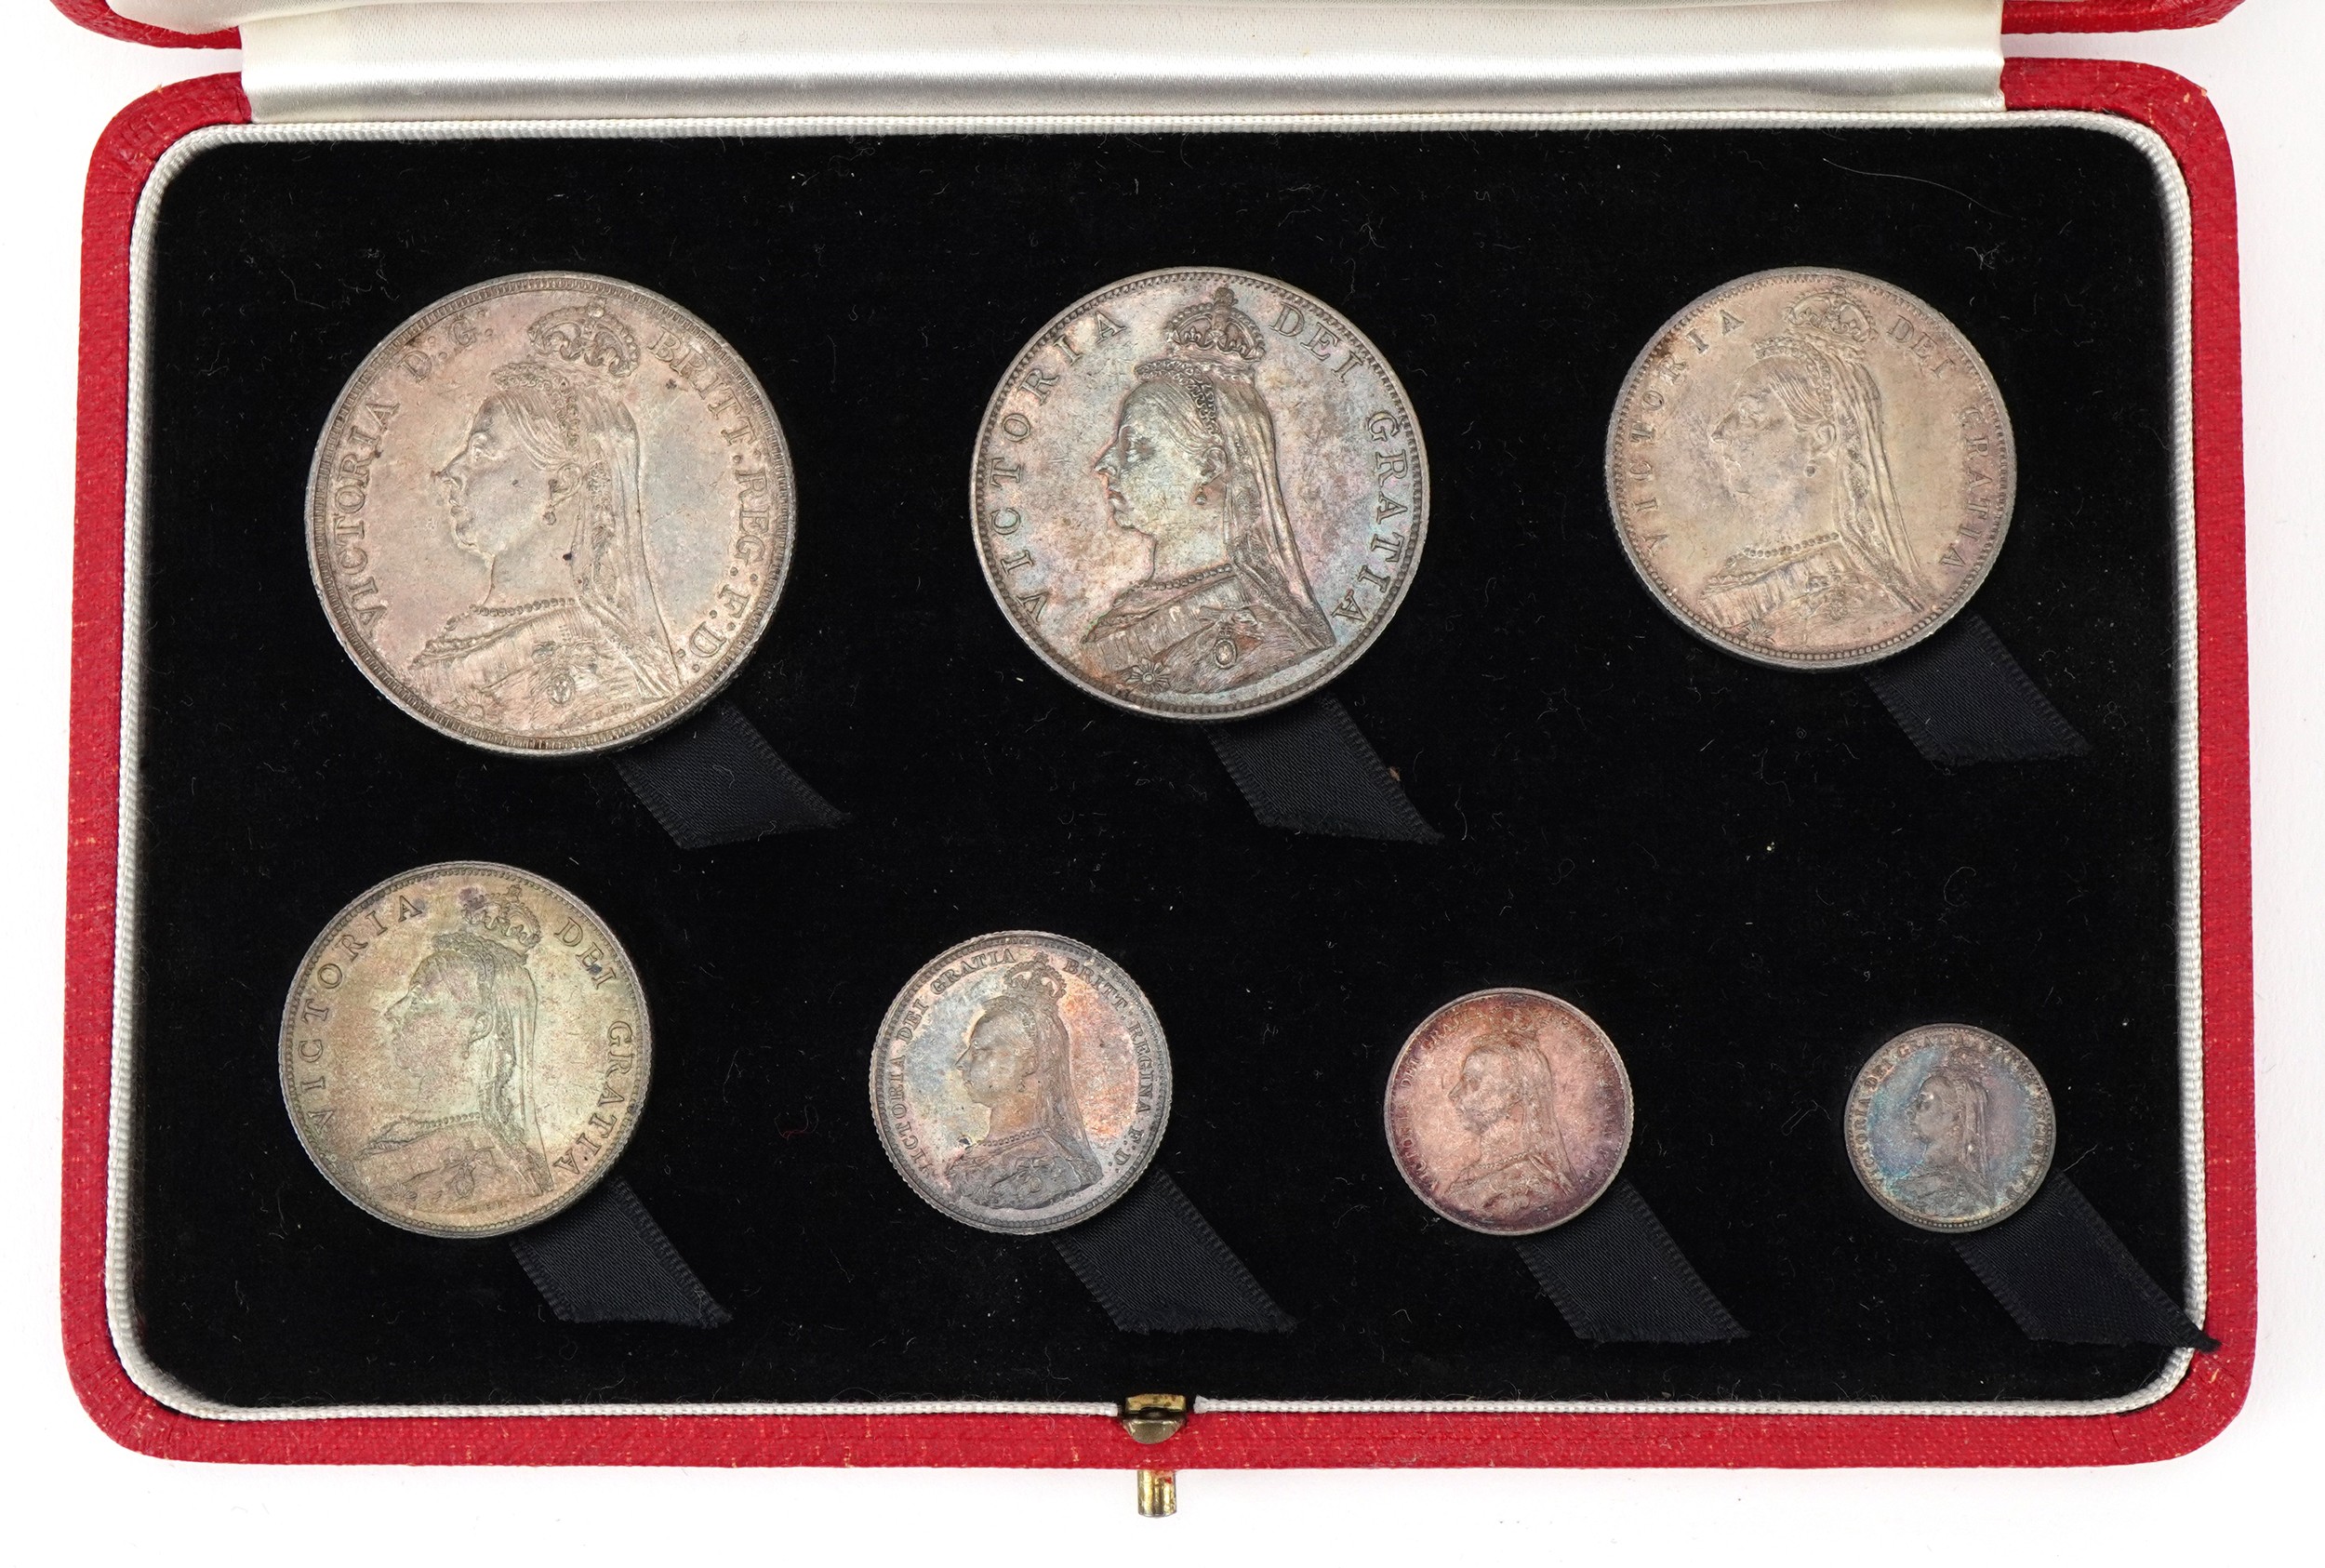 Queen Victoria 1887 Jubilee silver specimen coin set housed in a silk and velvet lined fitted case - Image 3 of 4